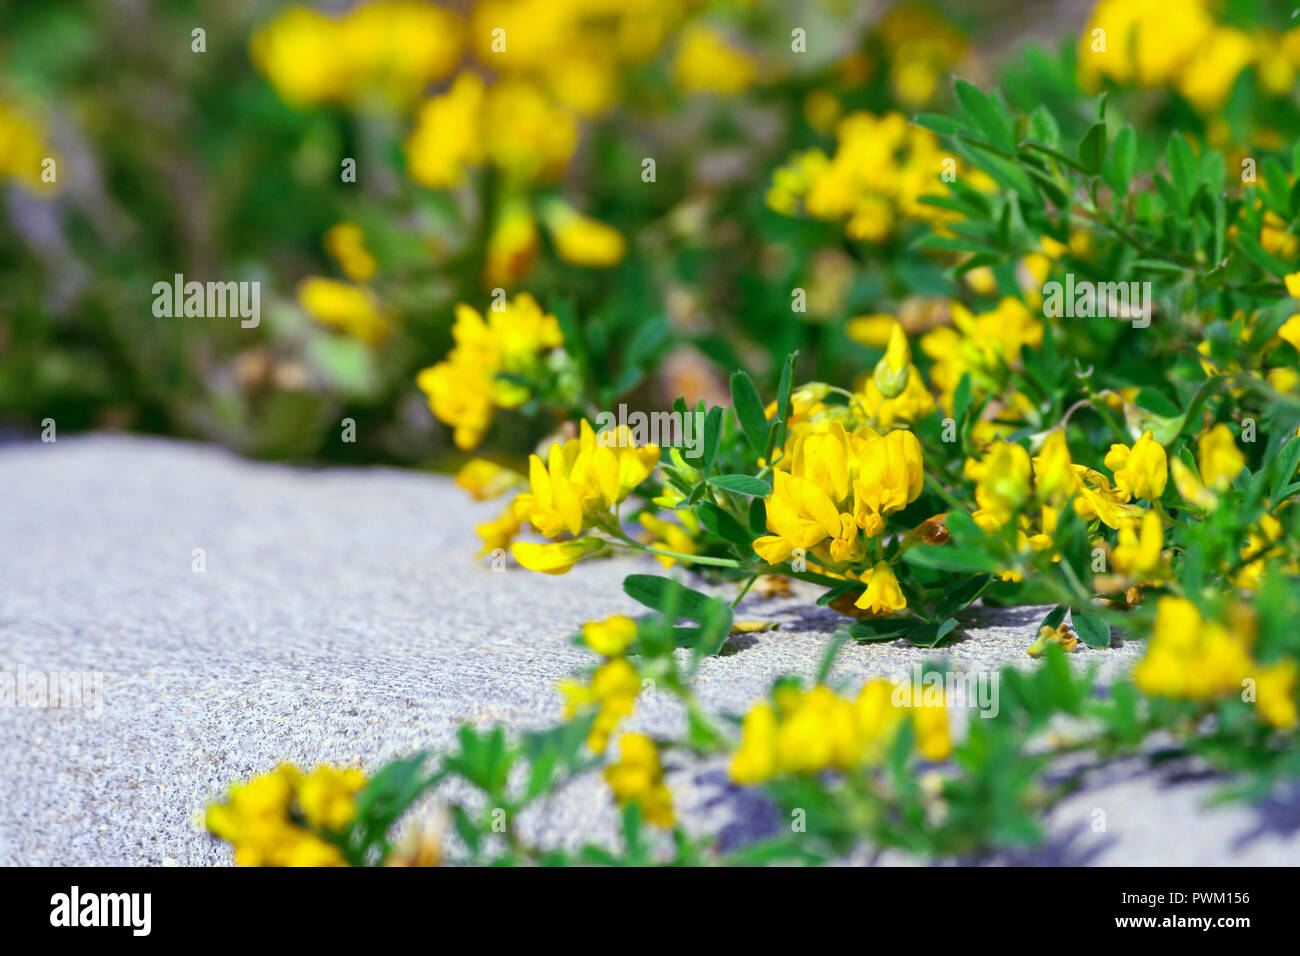 lathyrus pratensis, meadow plant as medicinal plant, bright yellow color with sharp flowers and thin small green leaves, flowers on right side, light Stock Photo